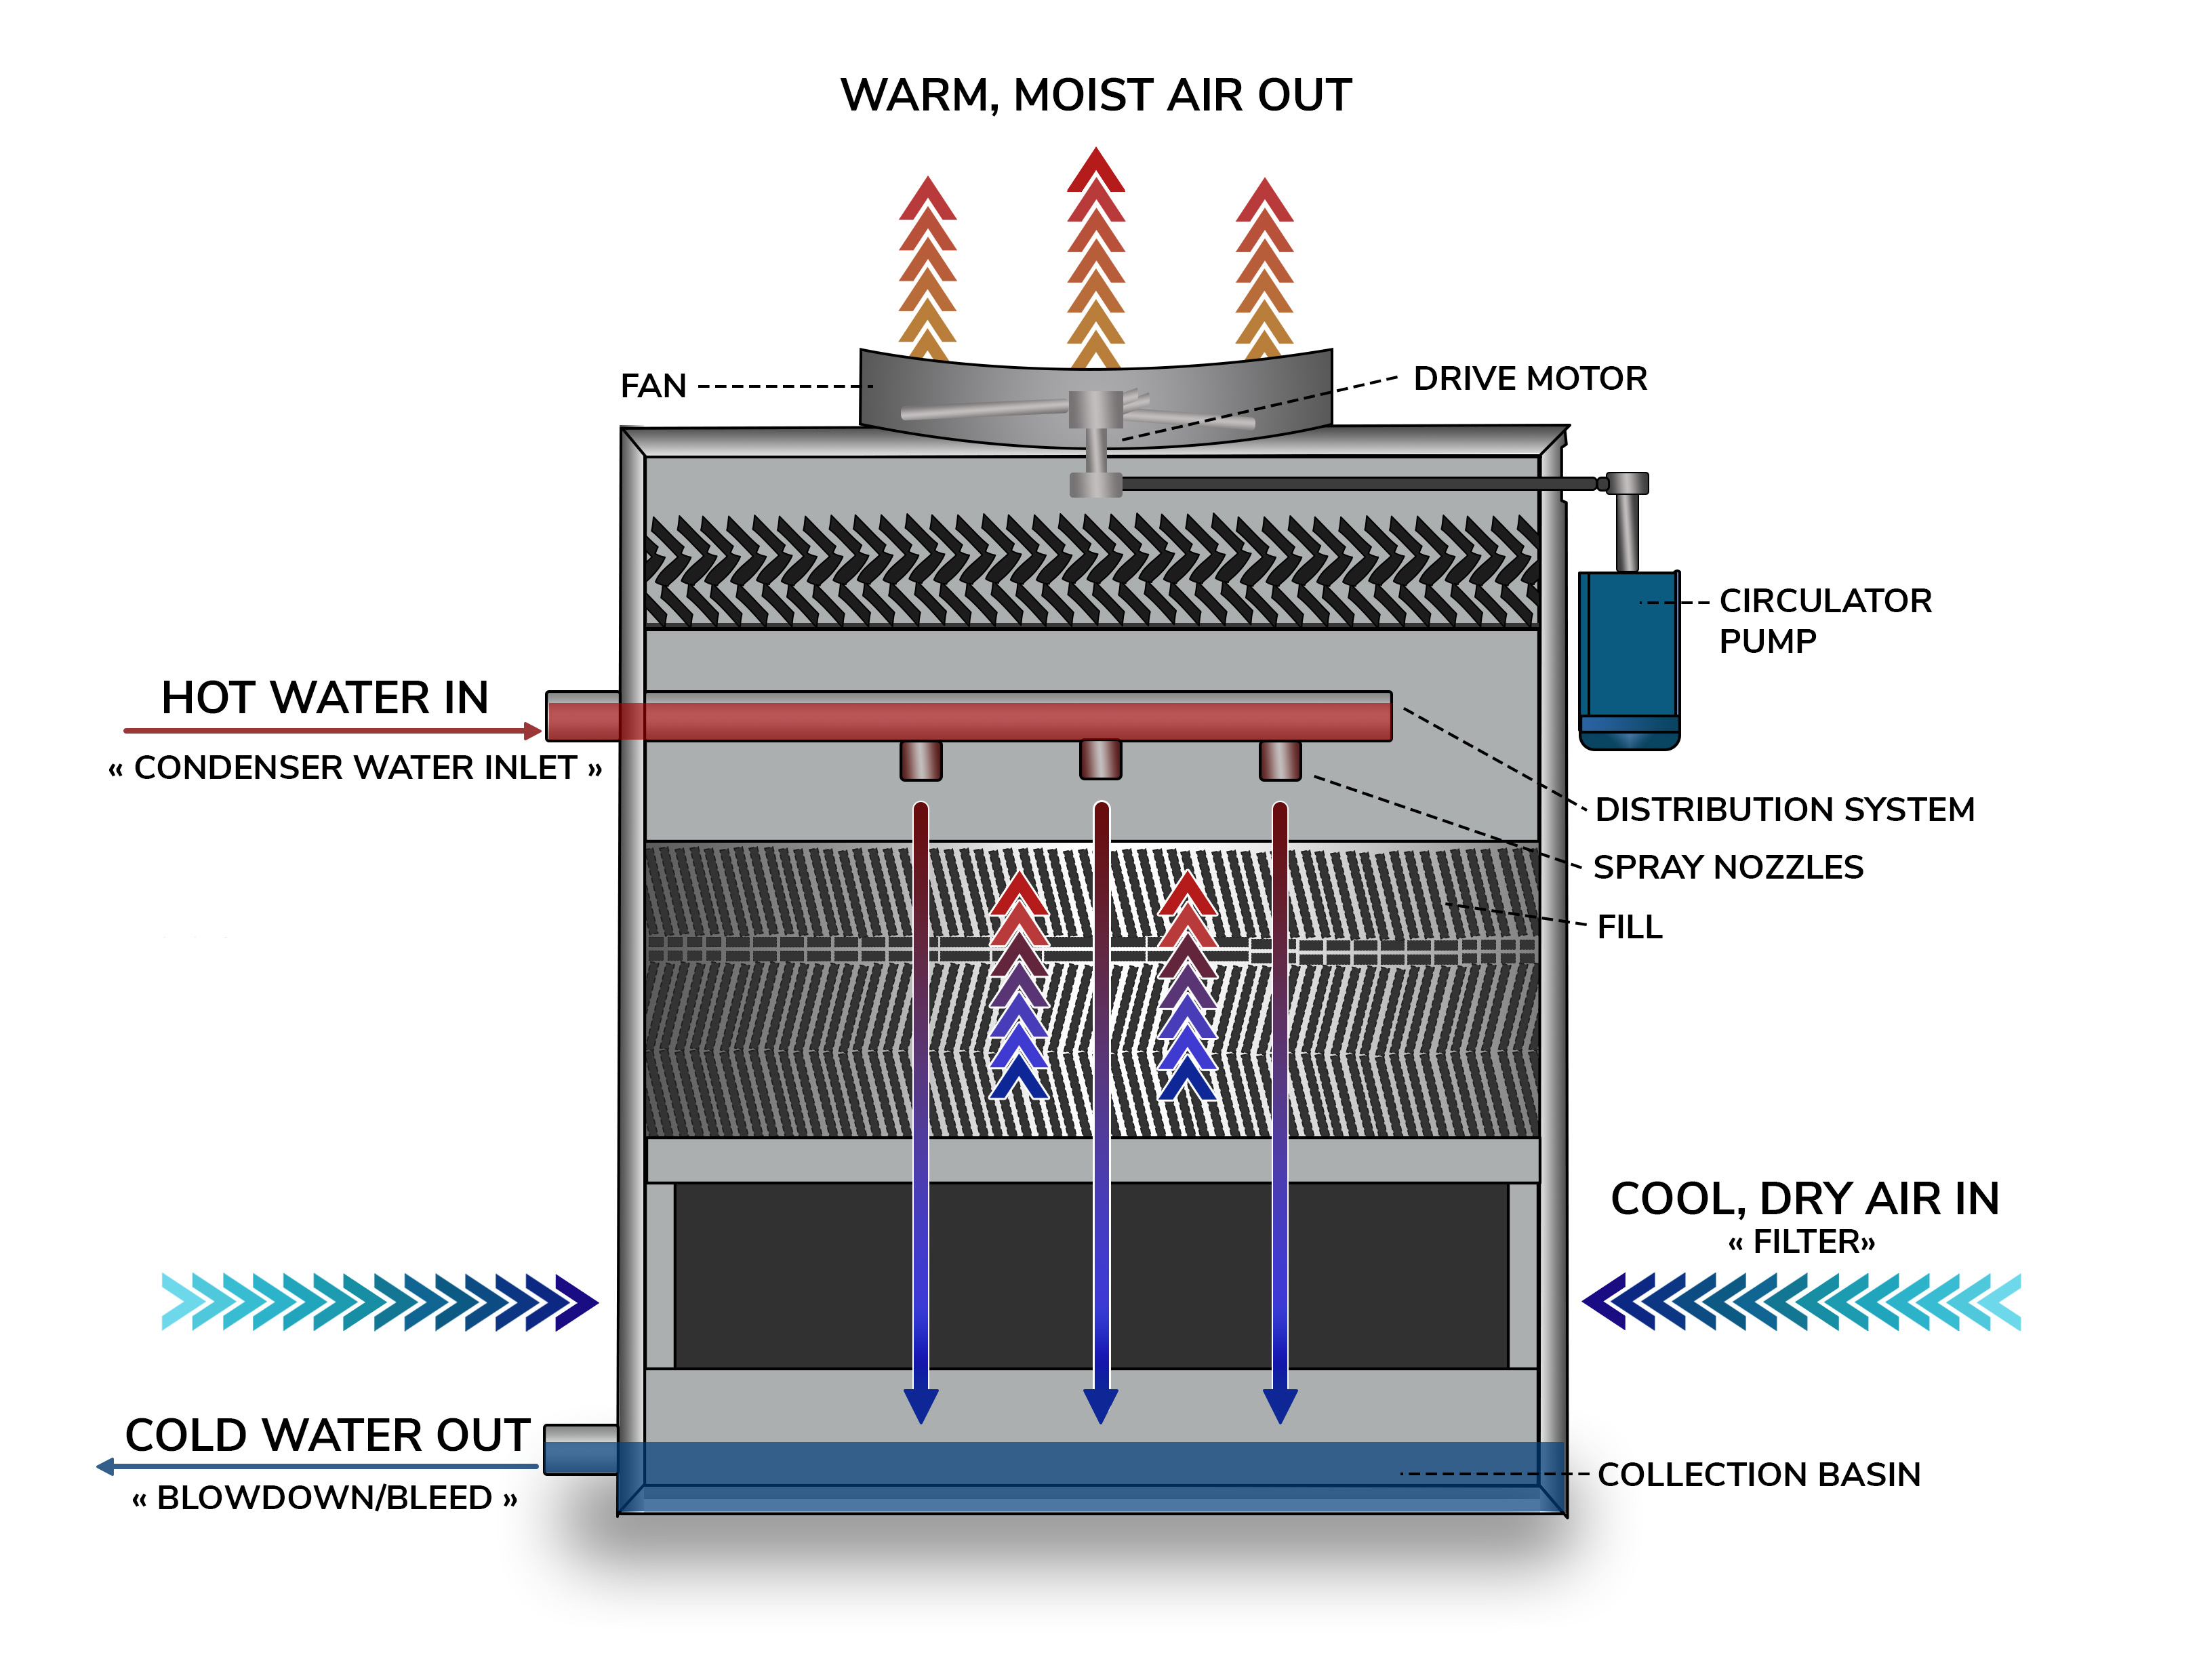 Cooling Towers 101: An Introductory Guide to Their Operation